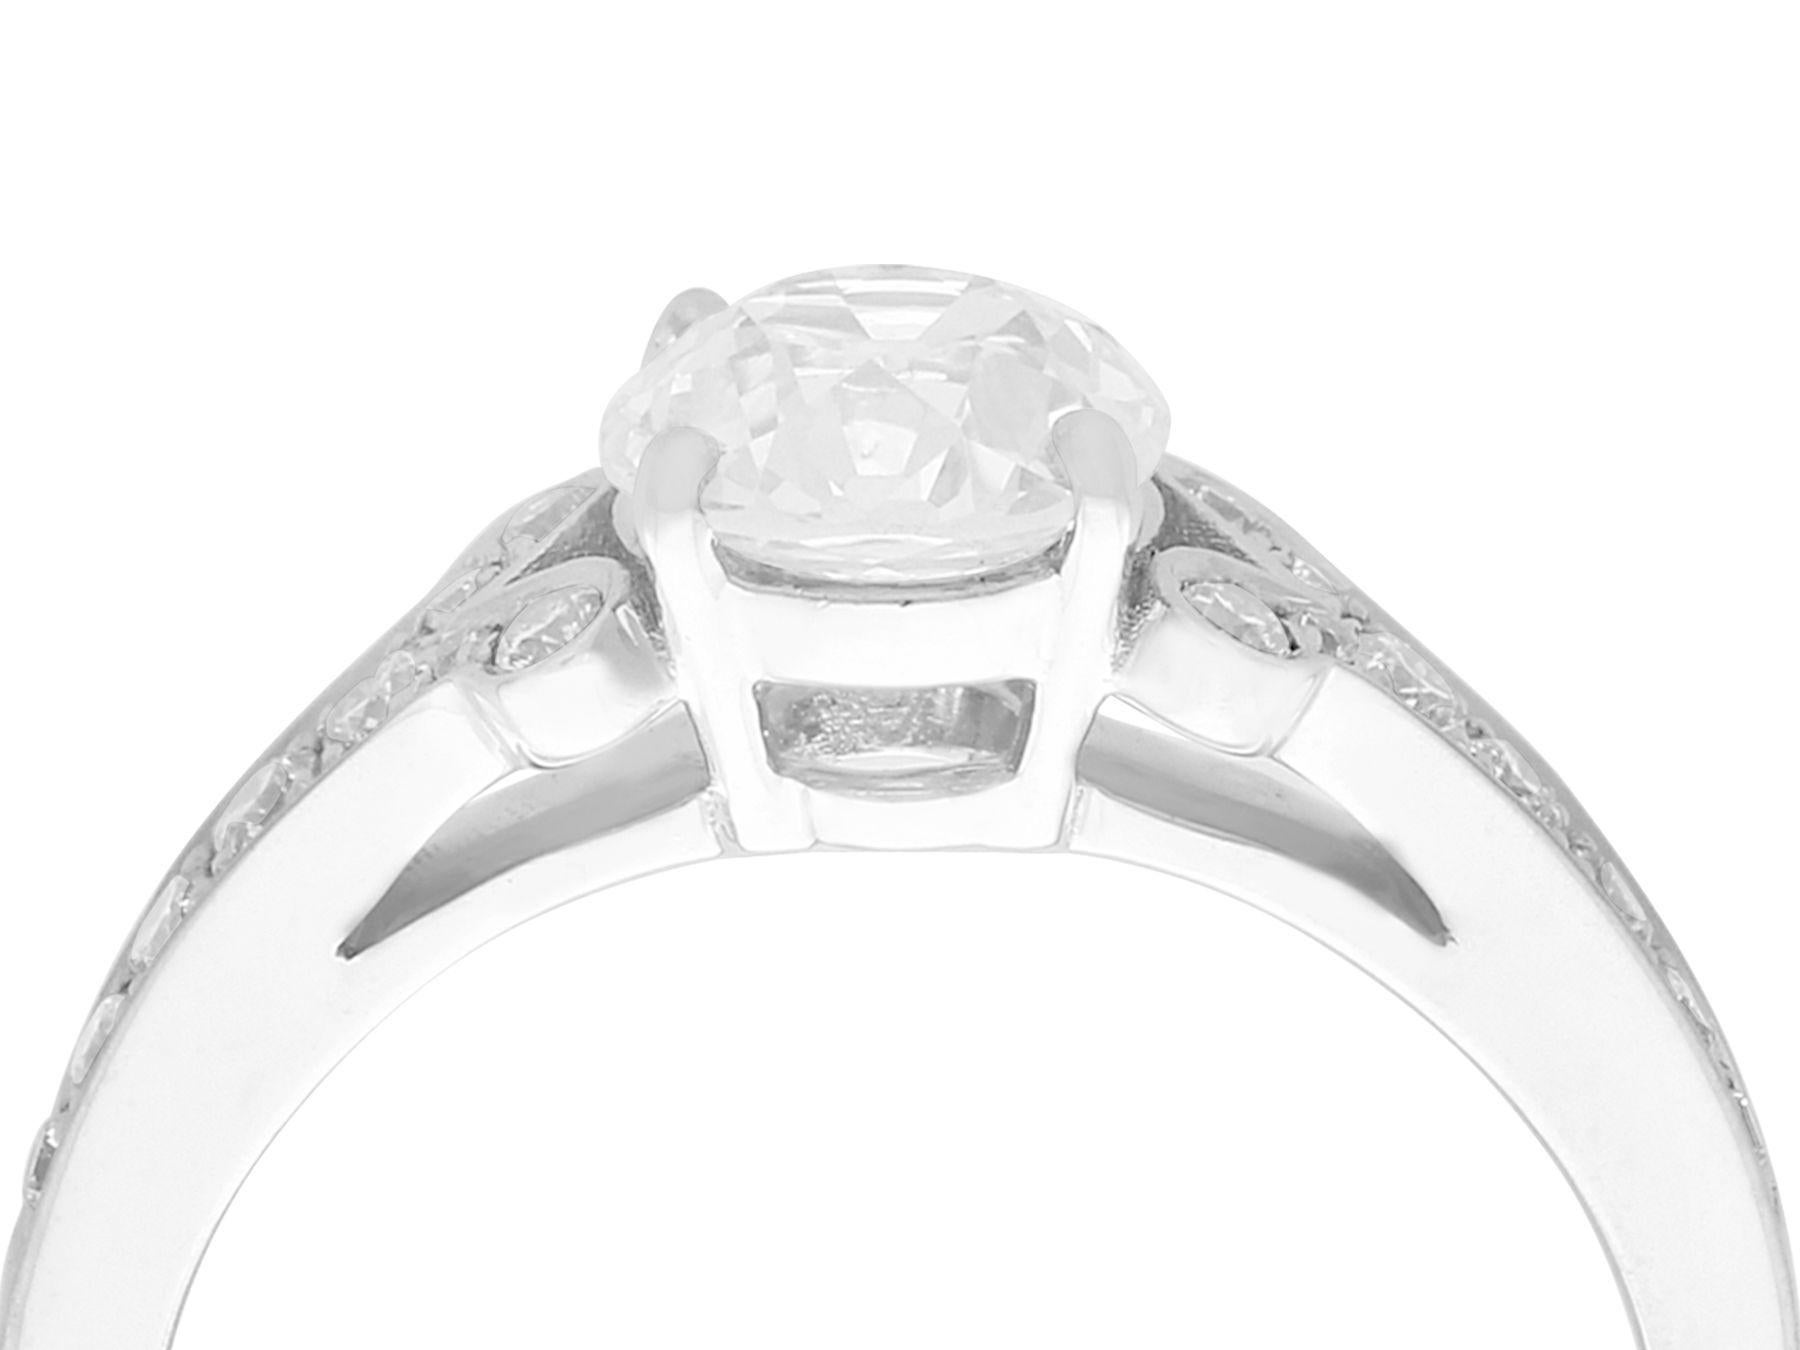 A stunning, fine and impressive antique 1.42 carat diamond (total) and contemporary 18k white gold ring; part of our diverse diamond jewelry and estate jewelry collections

his stunning diamond solitaire ring has been crafted in 18k white gold.

The